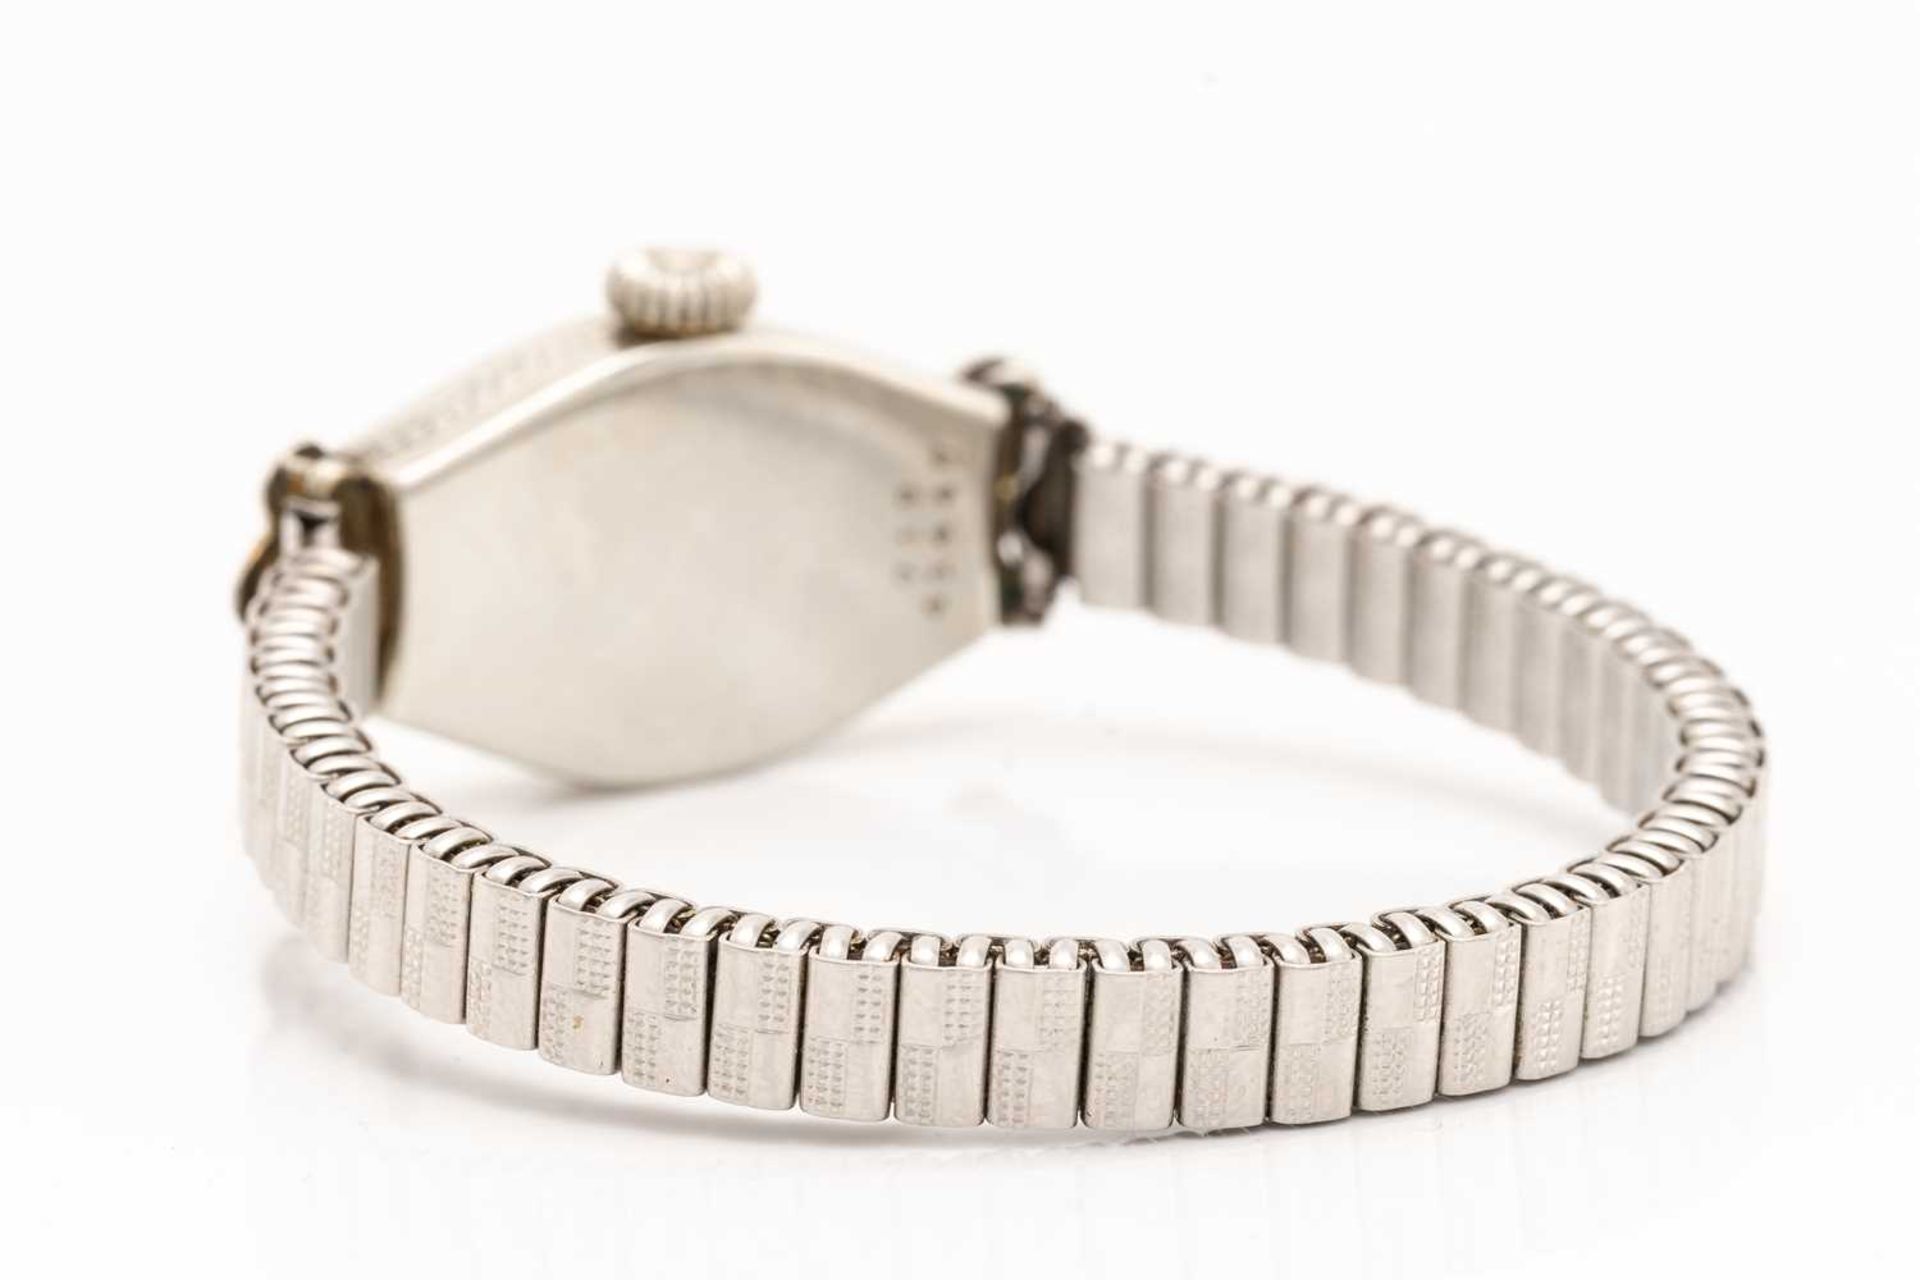 A 1937 Rolex lady's dress watch, featuring a Swiss made hand-wound movement in a white metal tonneau - Image 4 of 5